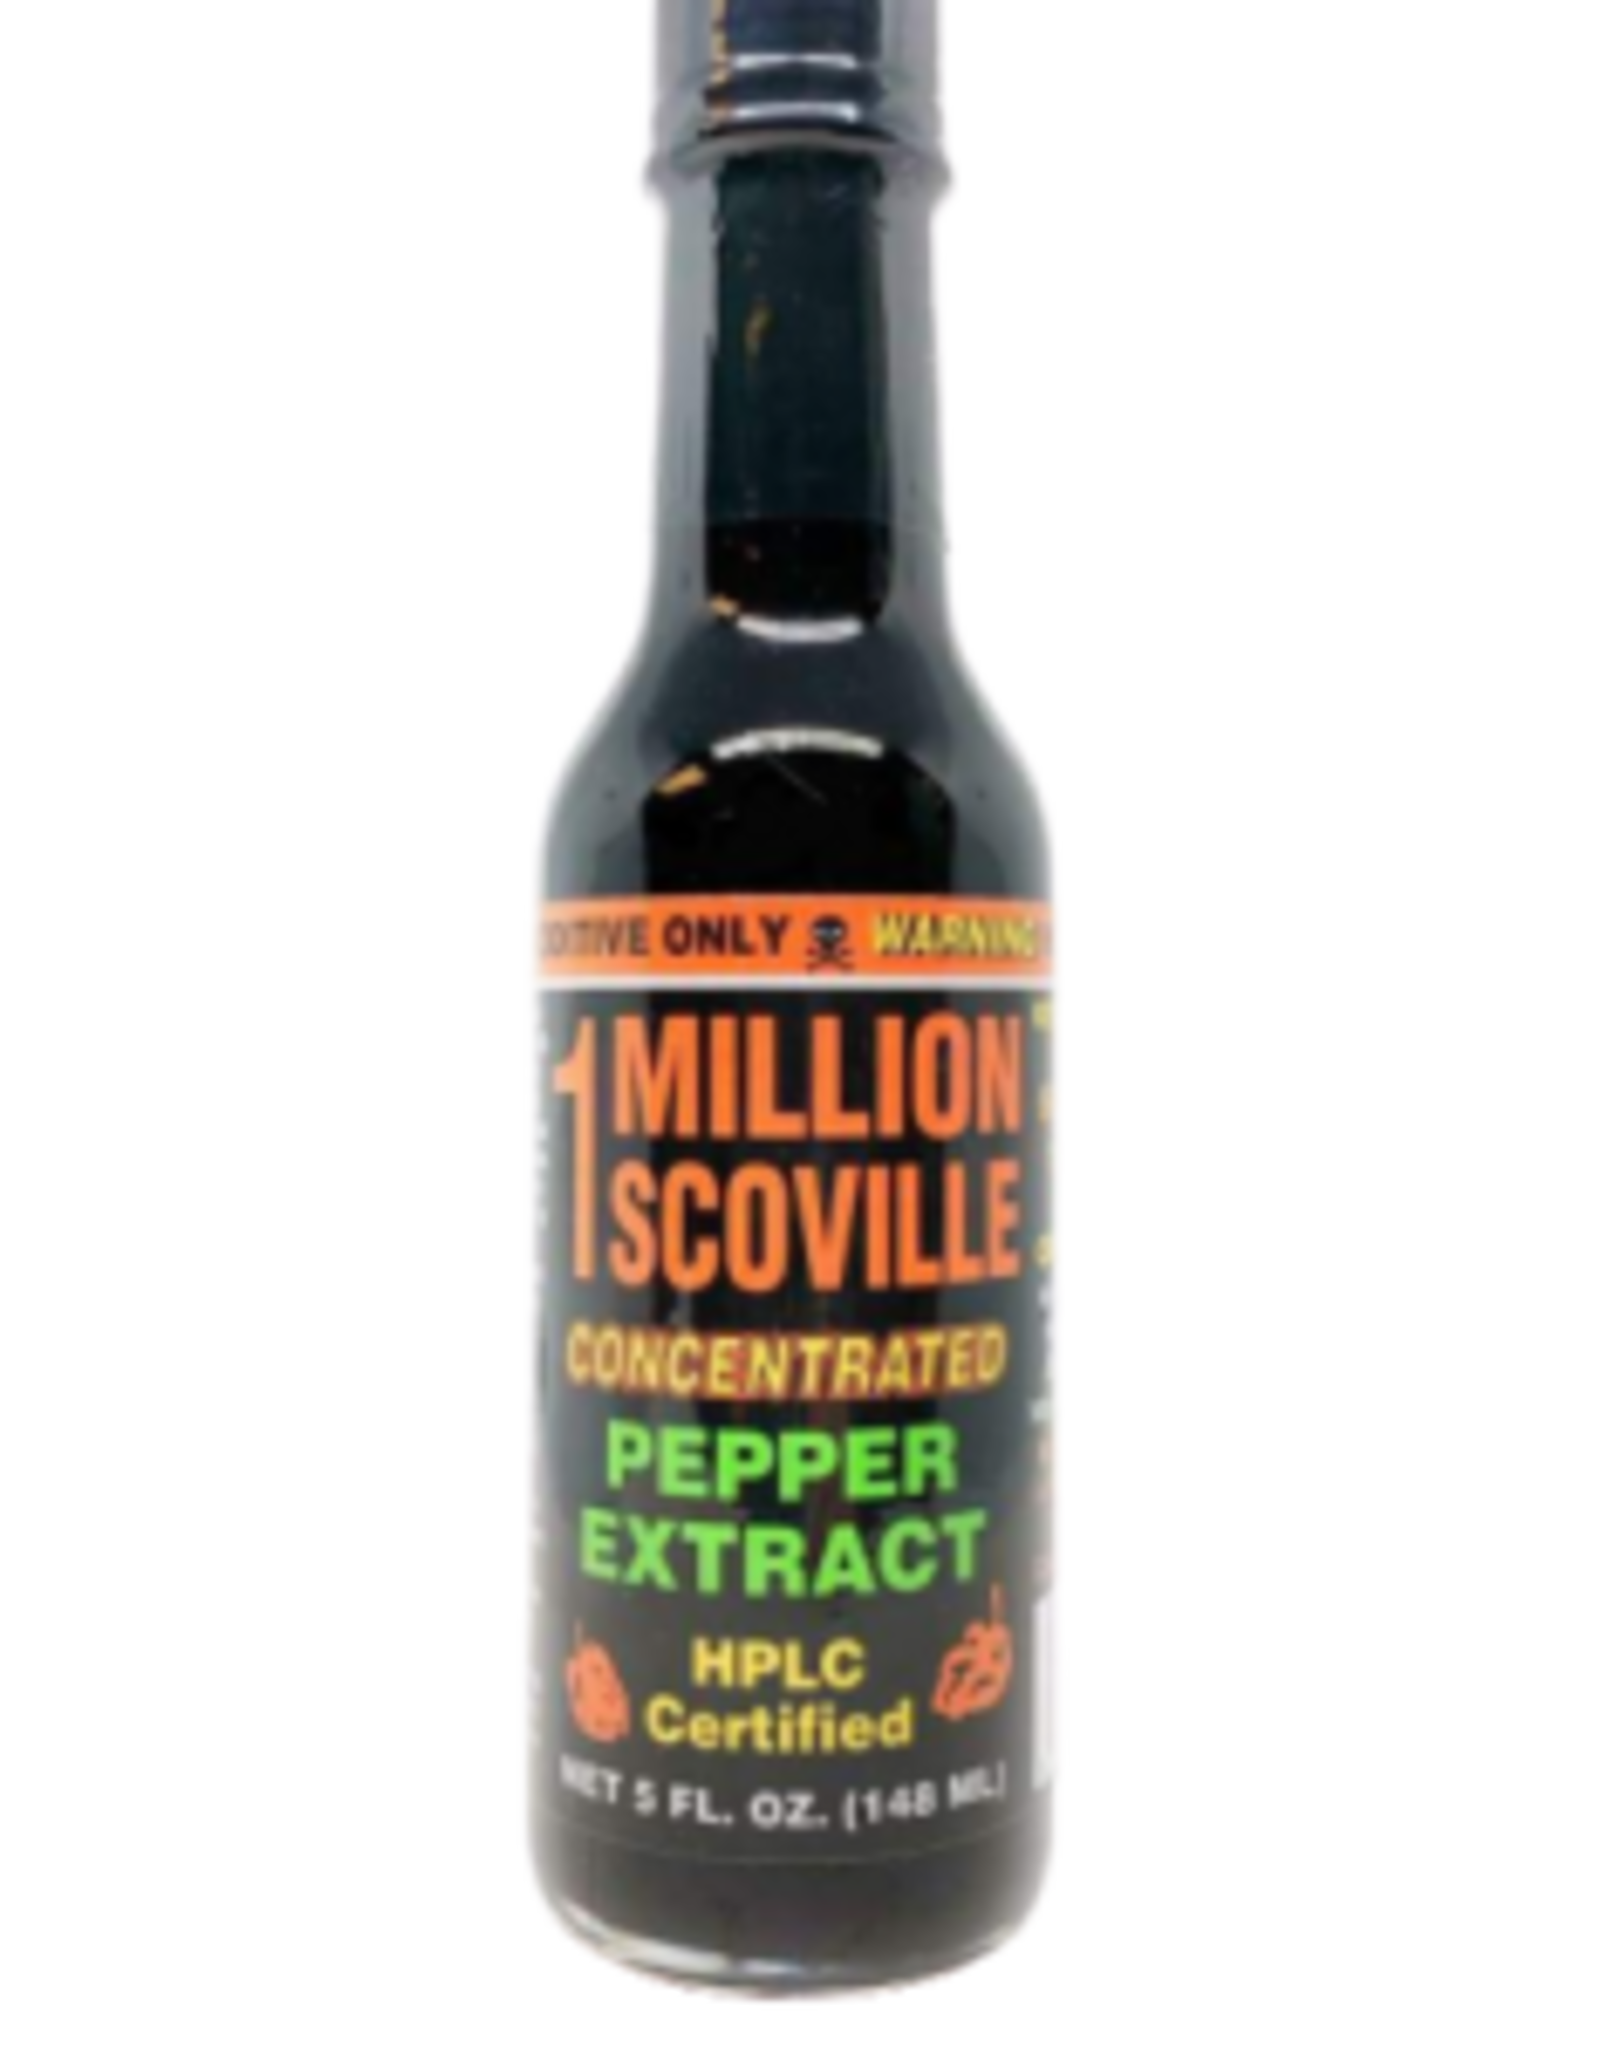 1 Million Scoville Concentrated Pepper